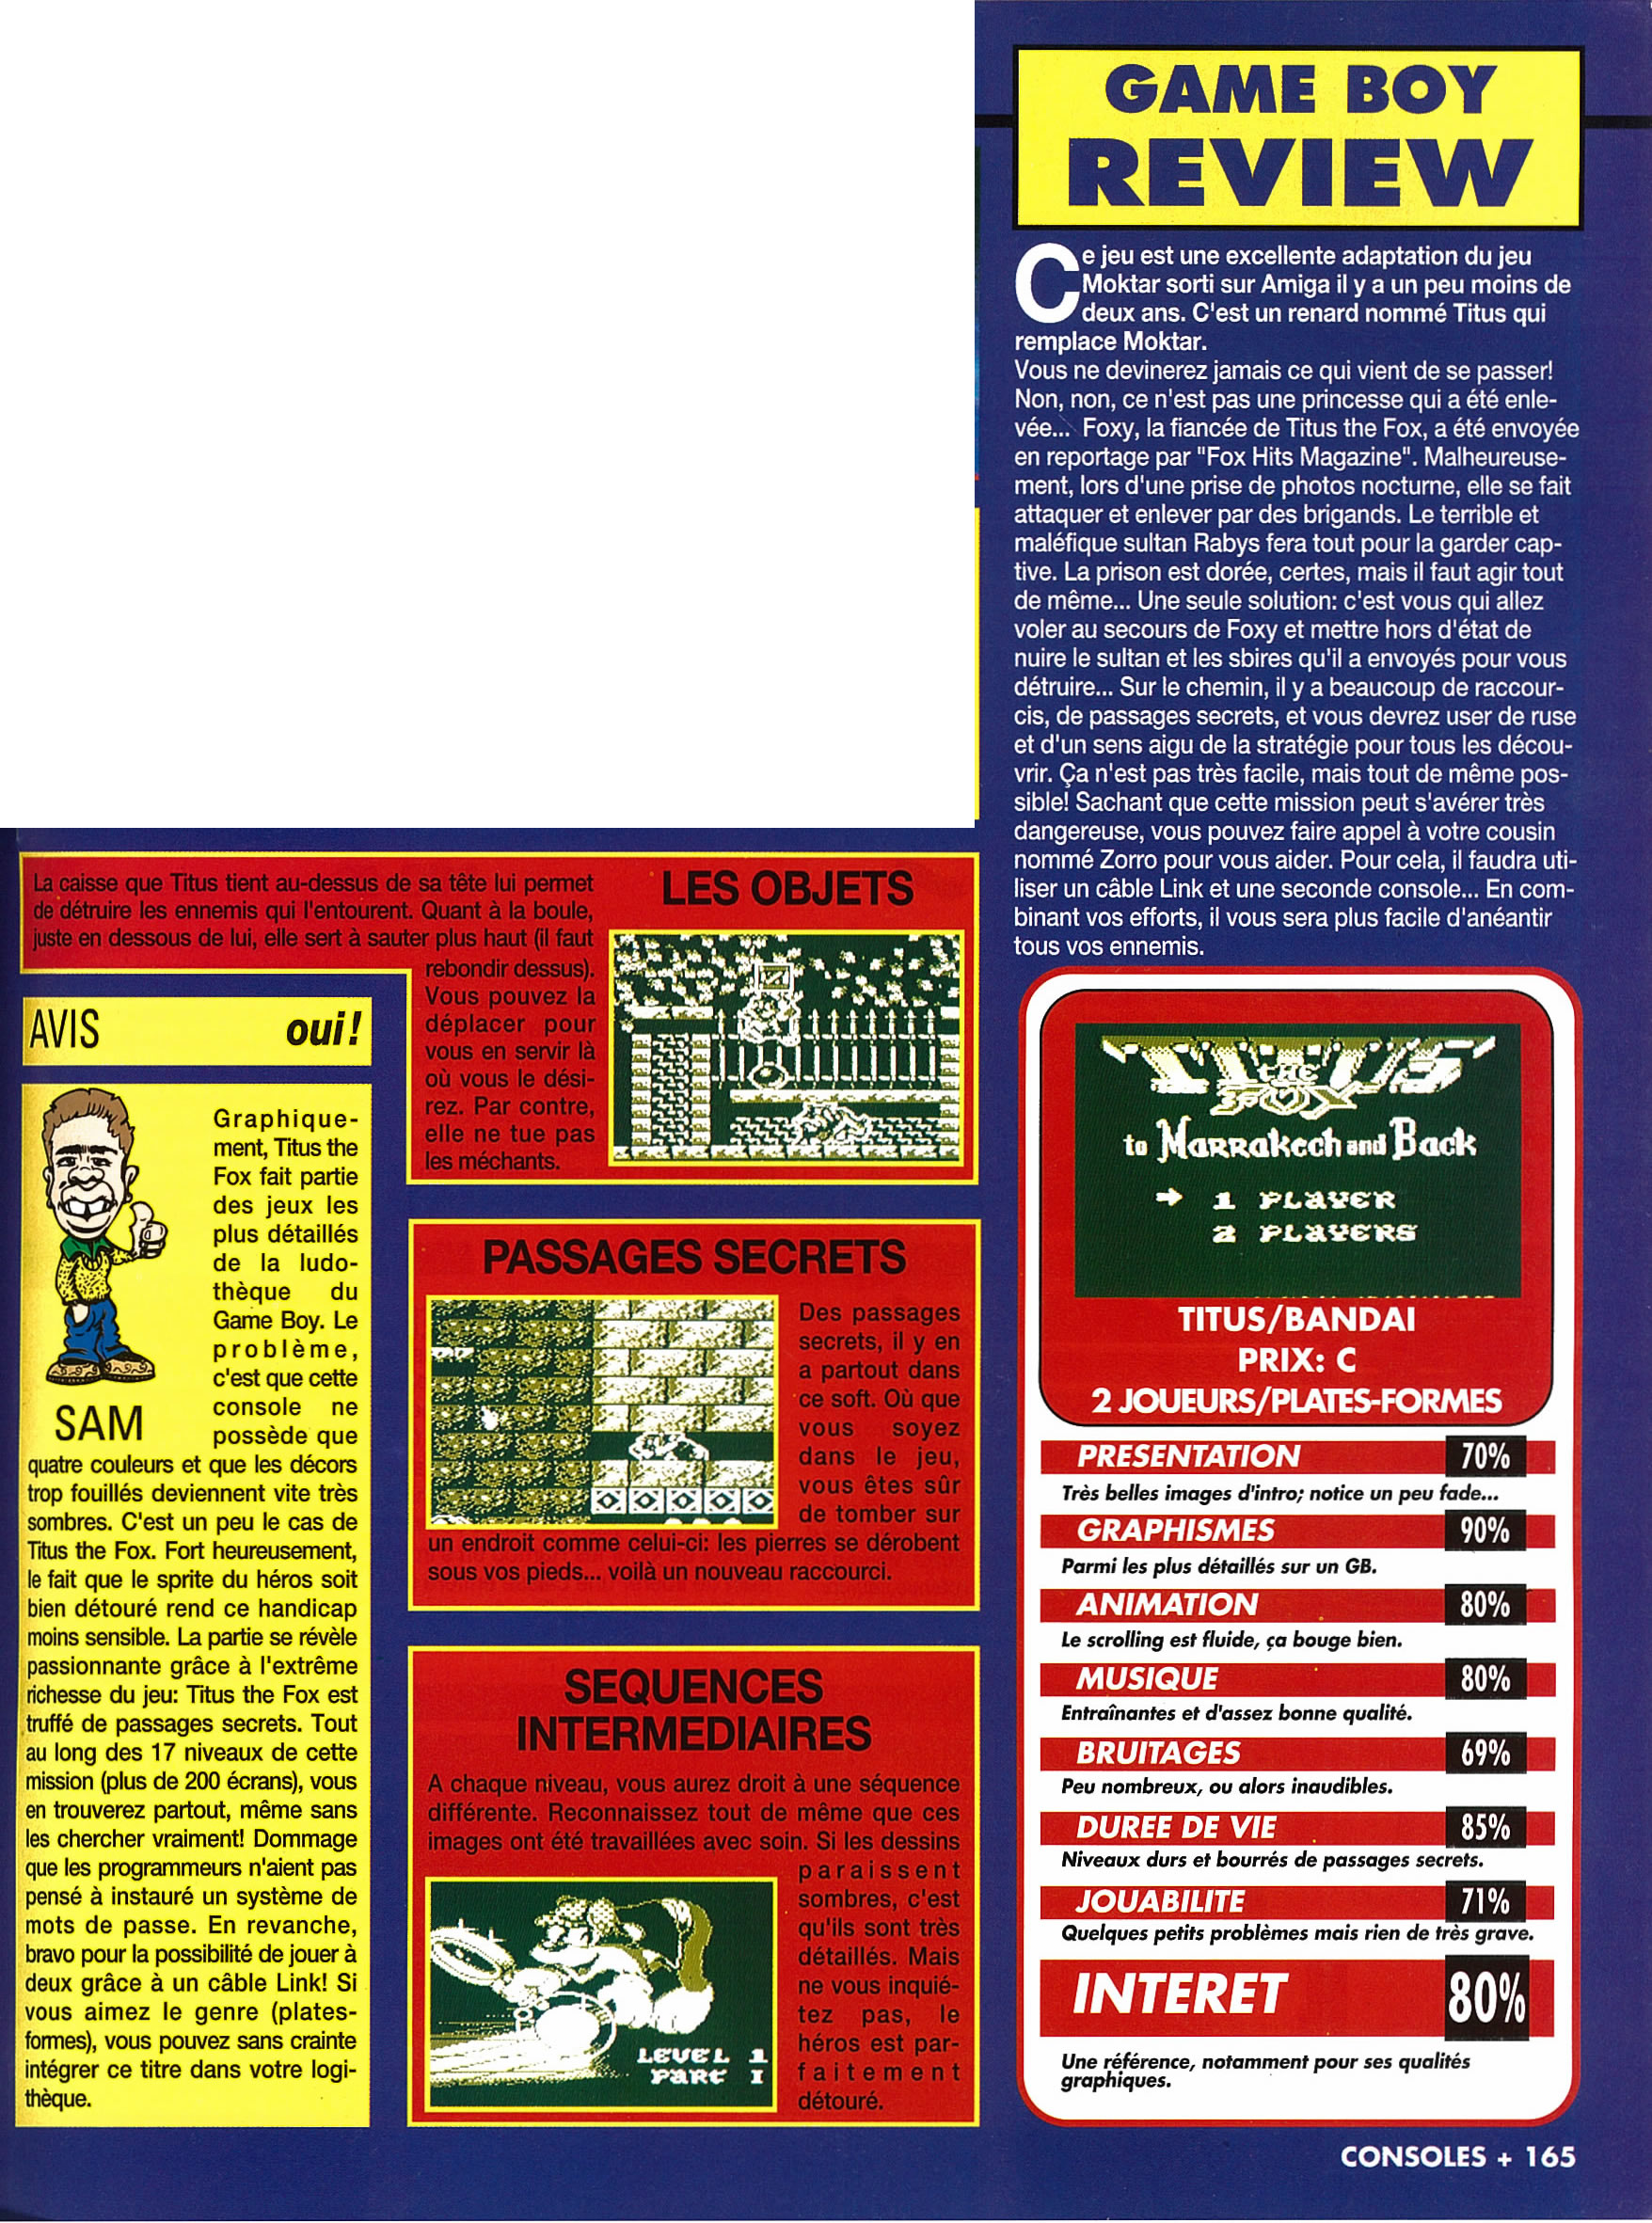 tests//773/Consoles + 023 - Page 165 (septembre 1993).jpg